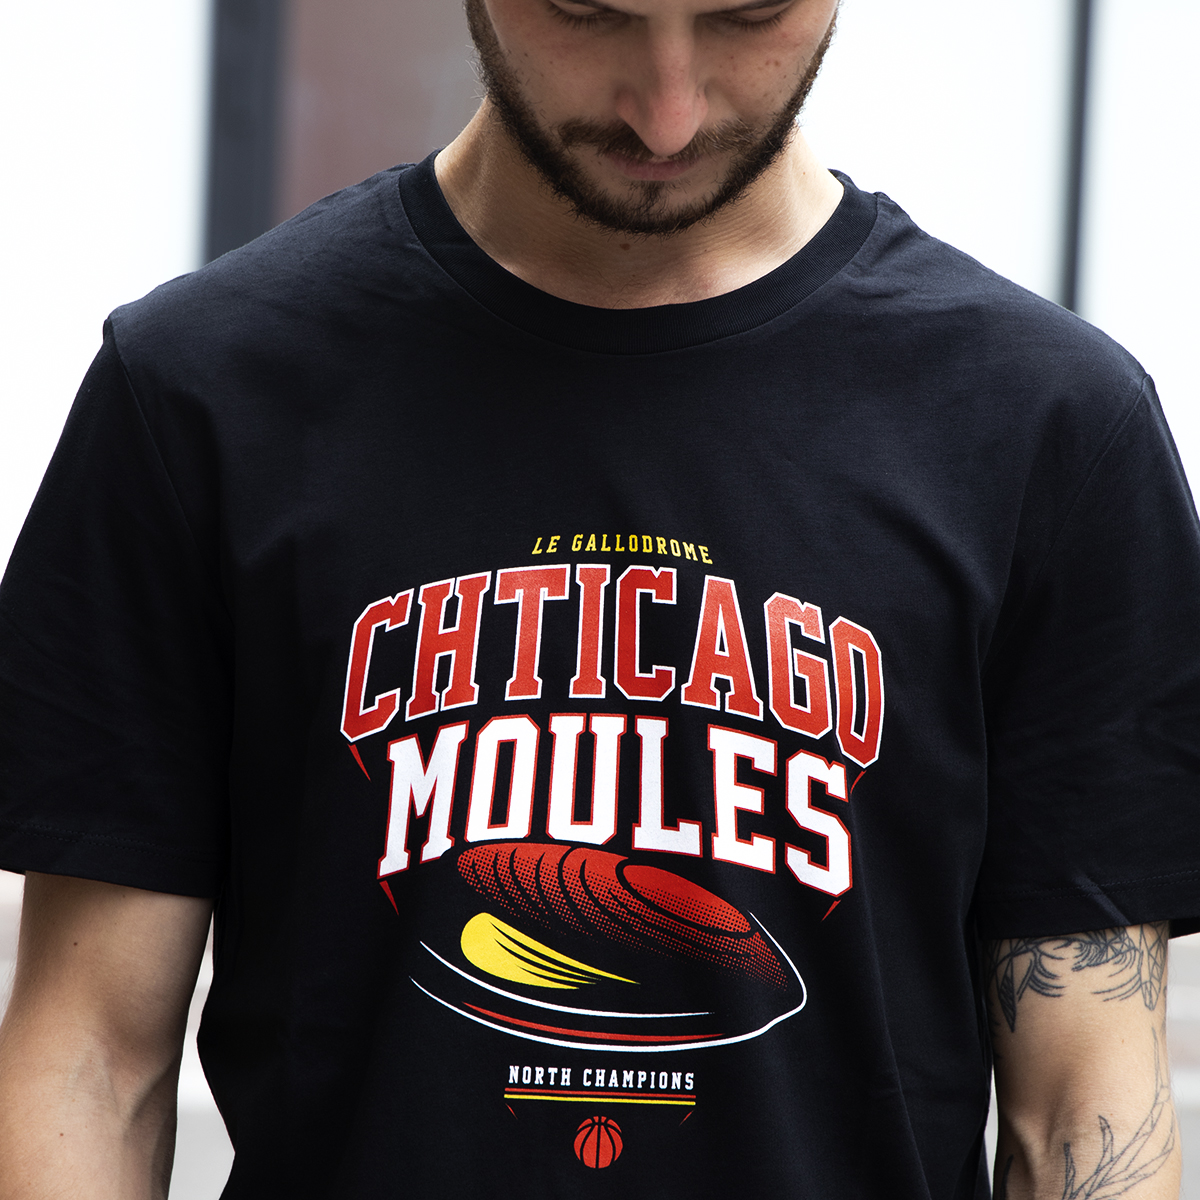 CHTICAGO MOULES